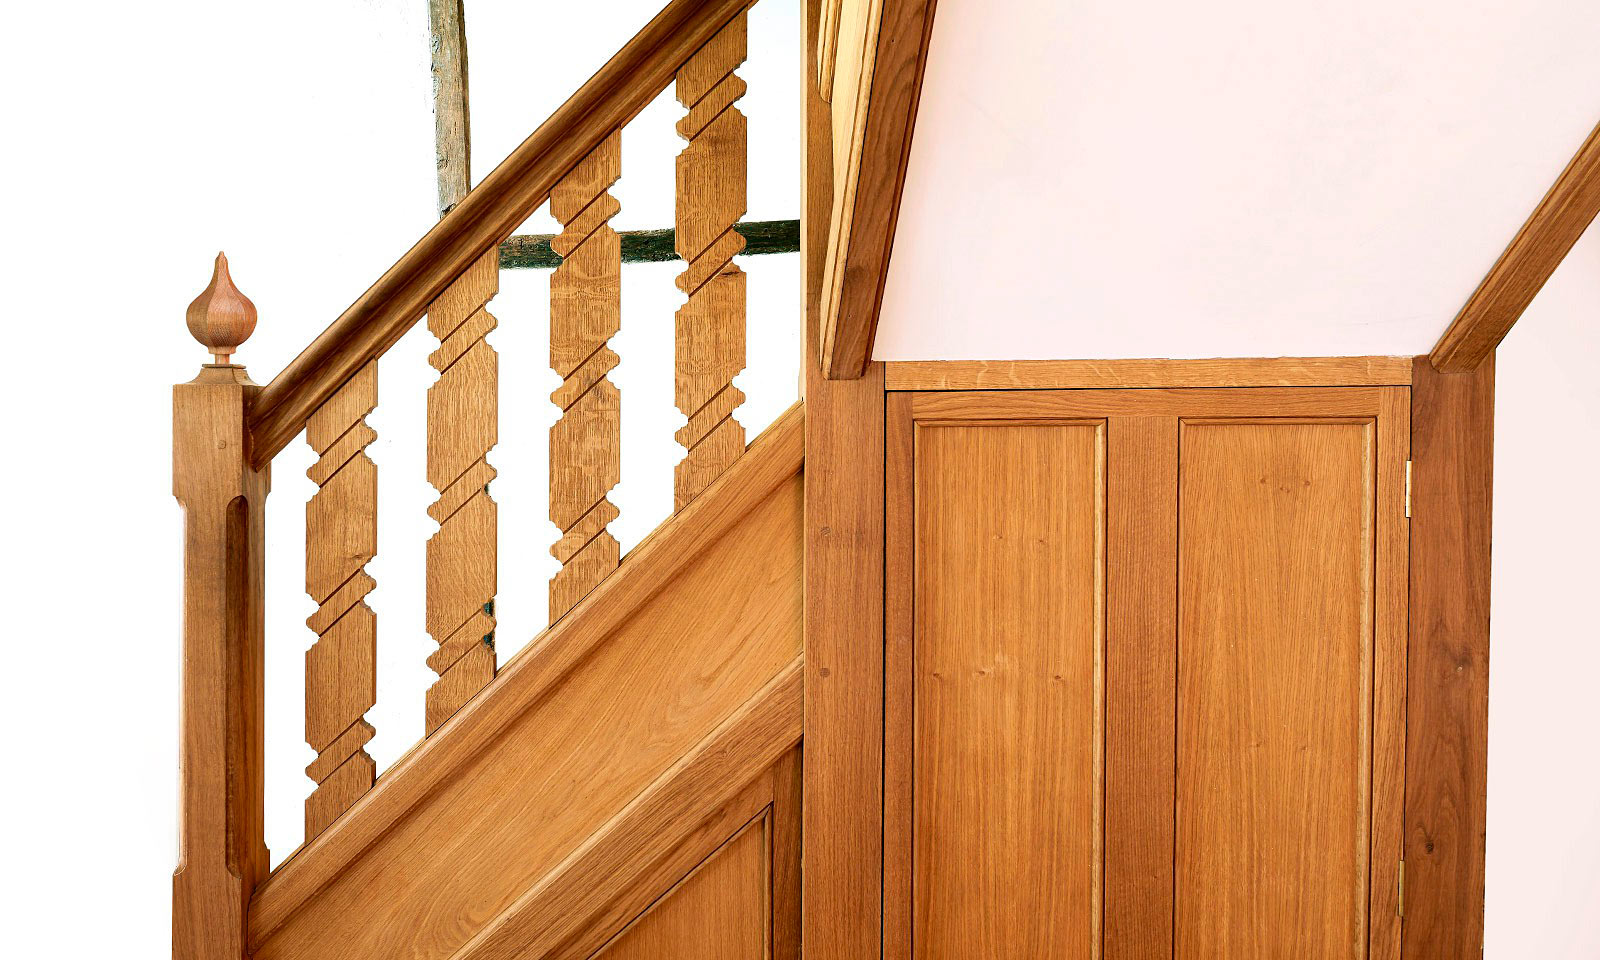 Gothic Staircase. Bespoke, custom made, hand-crafted, stairs, made using traditional wood-working techniques and manufactured out of solid European oak. Bespoke custom made joinery from Mounts Hill Woodcraft.